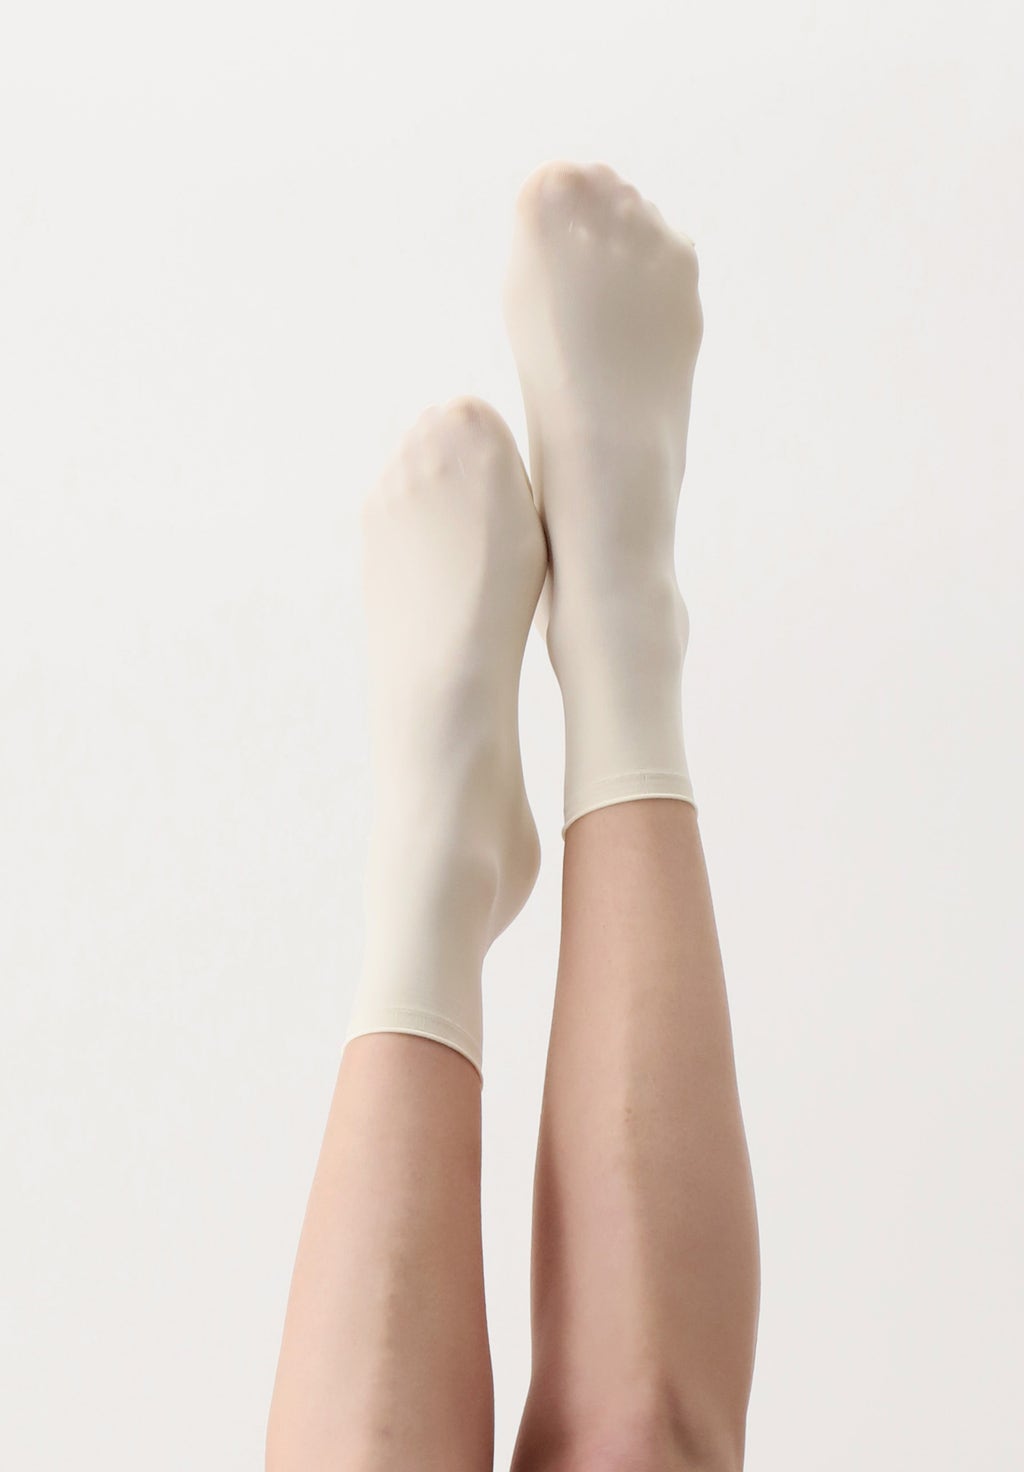 OroblÌ_ All Colors Sock - Soft plain pale pastel yellow (vanilla) opaque ankle tube socks with plain cuff.